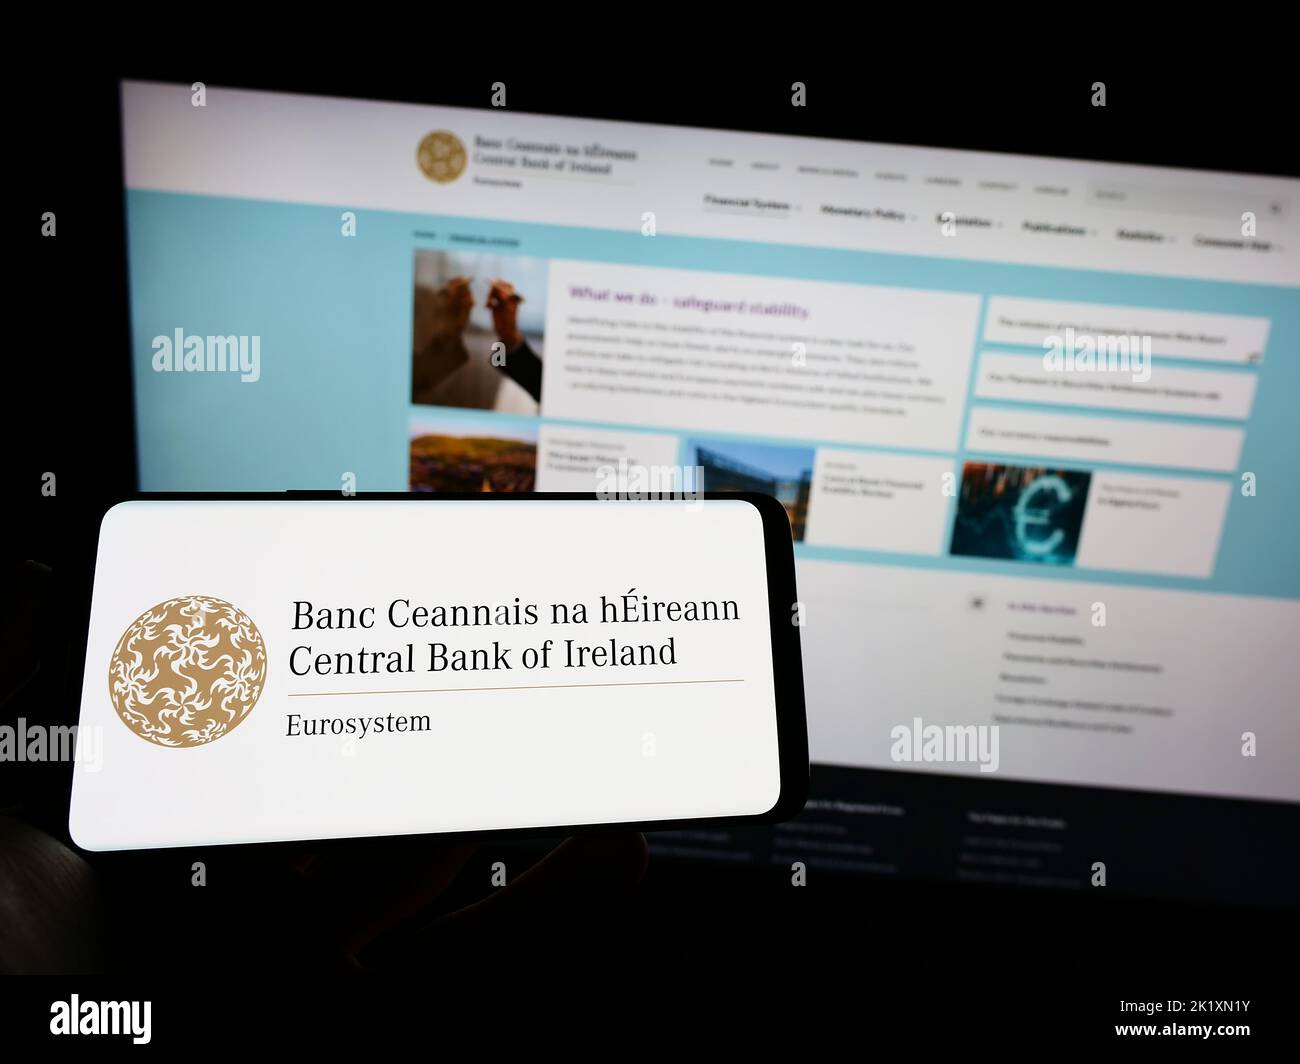 Person holding mobile phone with logo of financial institution Central Bank of Ireland on screen in front of web page. Focus on phone display. Stock Photo